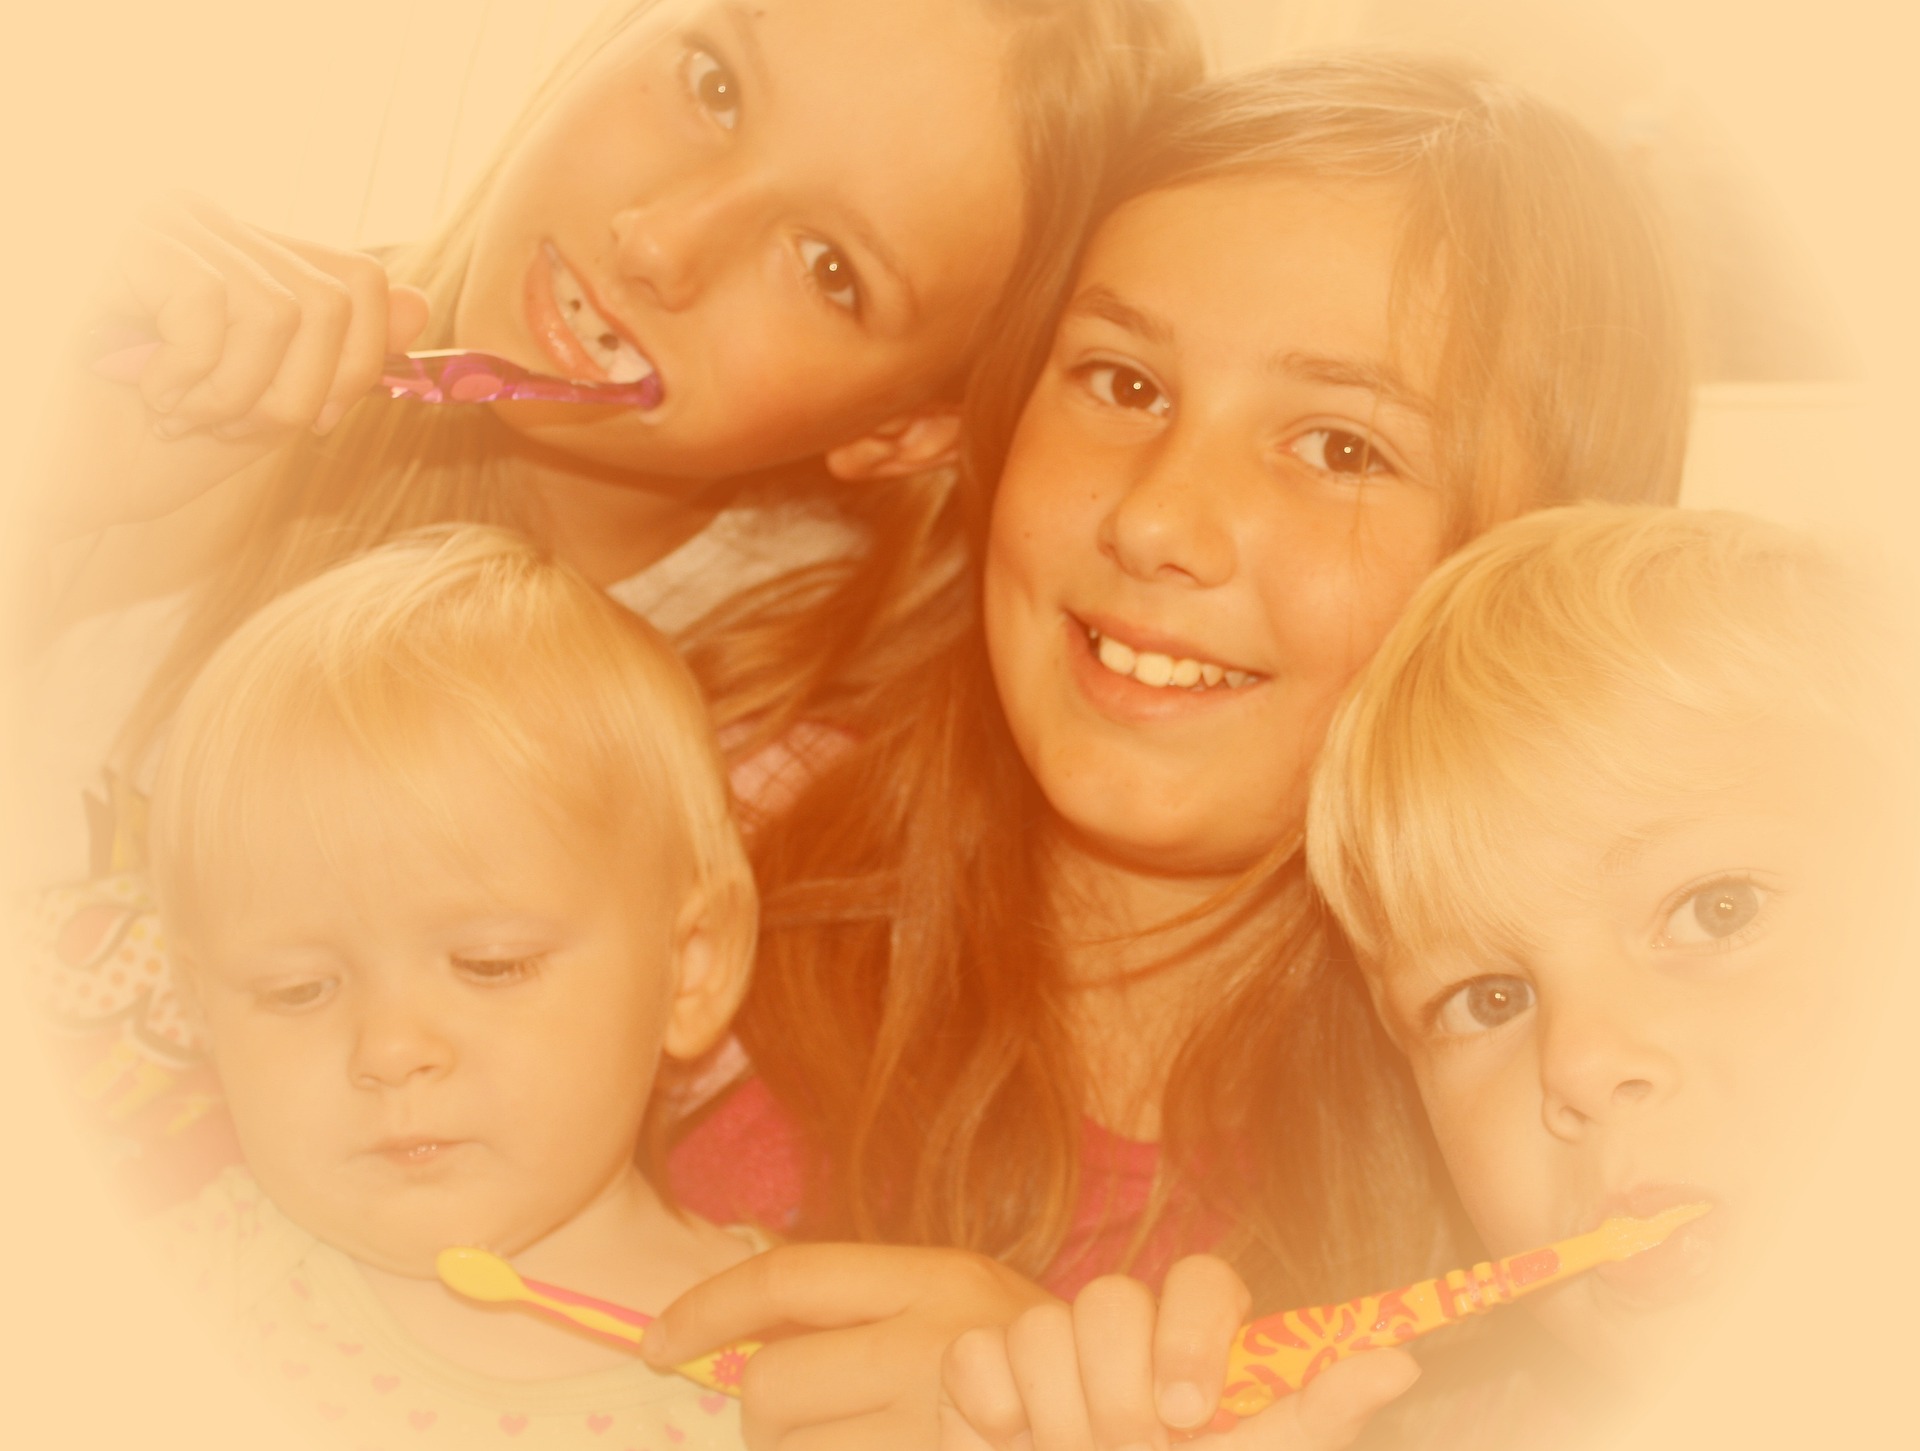 Why is it important to give children the habit of brushing their teeth?